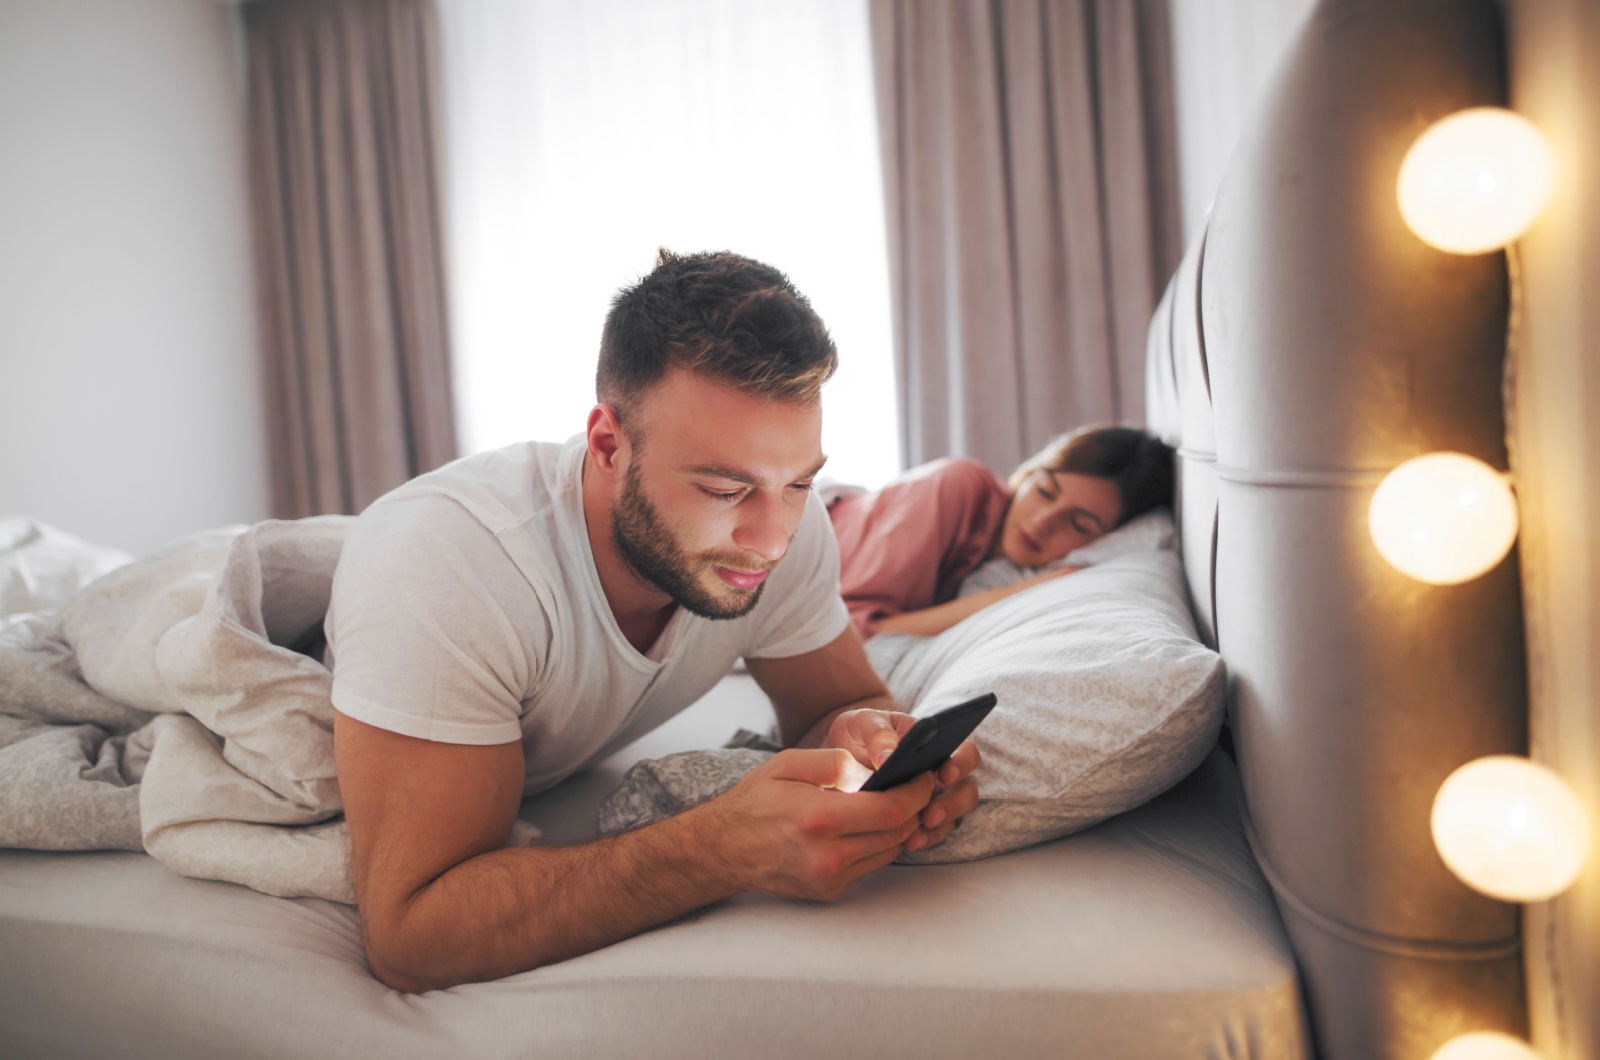 man texting while girlfriend is sleeping